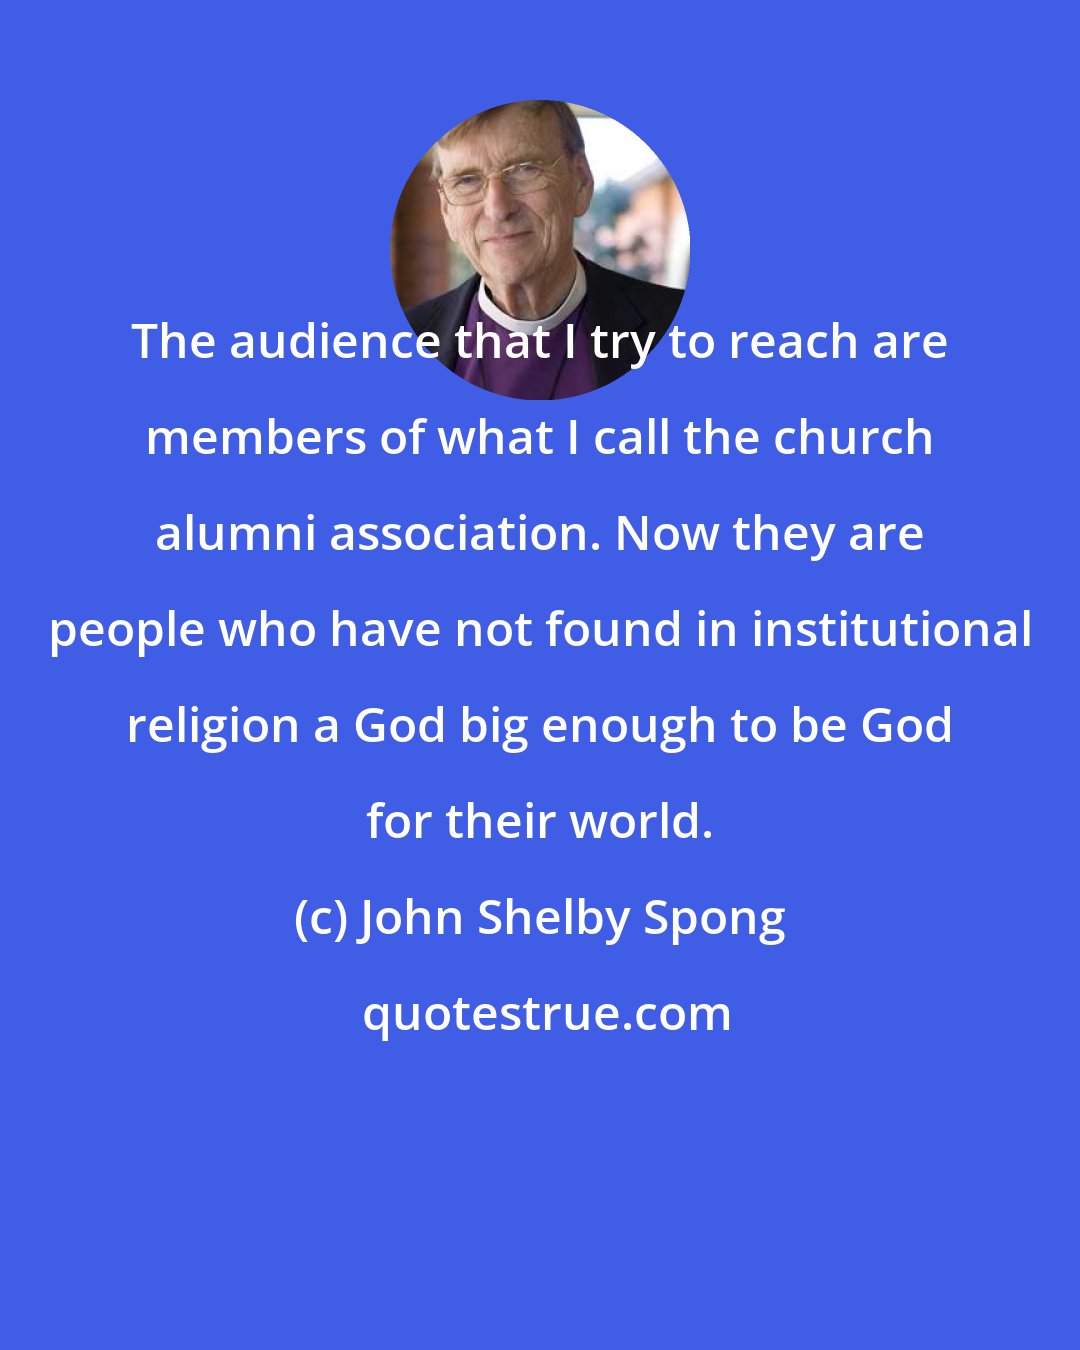 John Shelby Spong: The audience that I try to reach are members of what I call the church alumni association. Now they are people who have not found in institutional religion a God big enough to be God for their world.